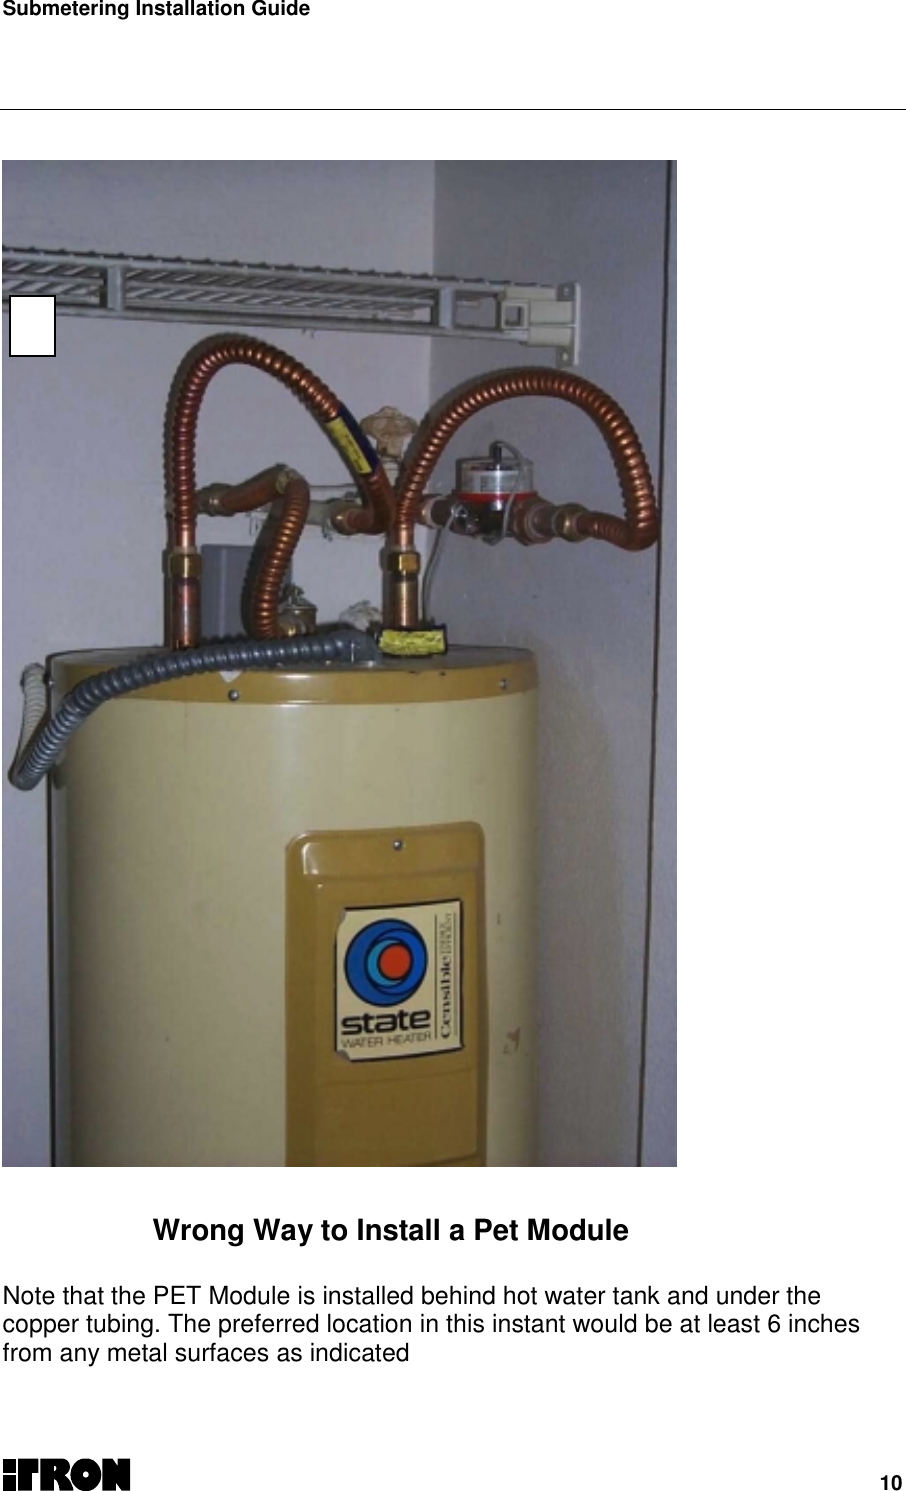 Submetering Installation Guide10      Wrong Way to Install a Pet ModuleNote that the PET Module is installed behind hot water tank and under thecopper tubing. The preferred location in this instant would be at least 6 inchesfrom any metal surfaces as indicated 